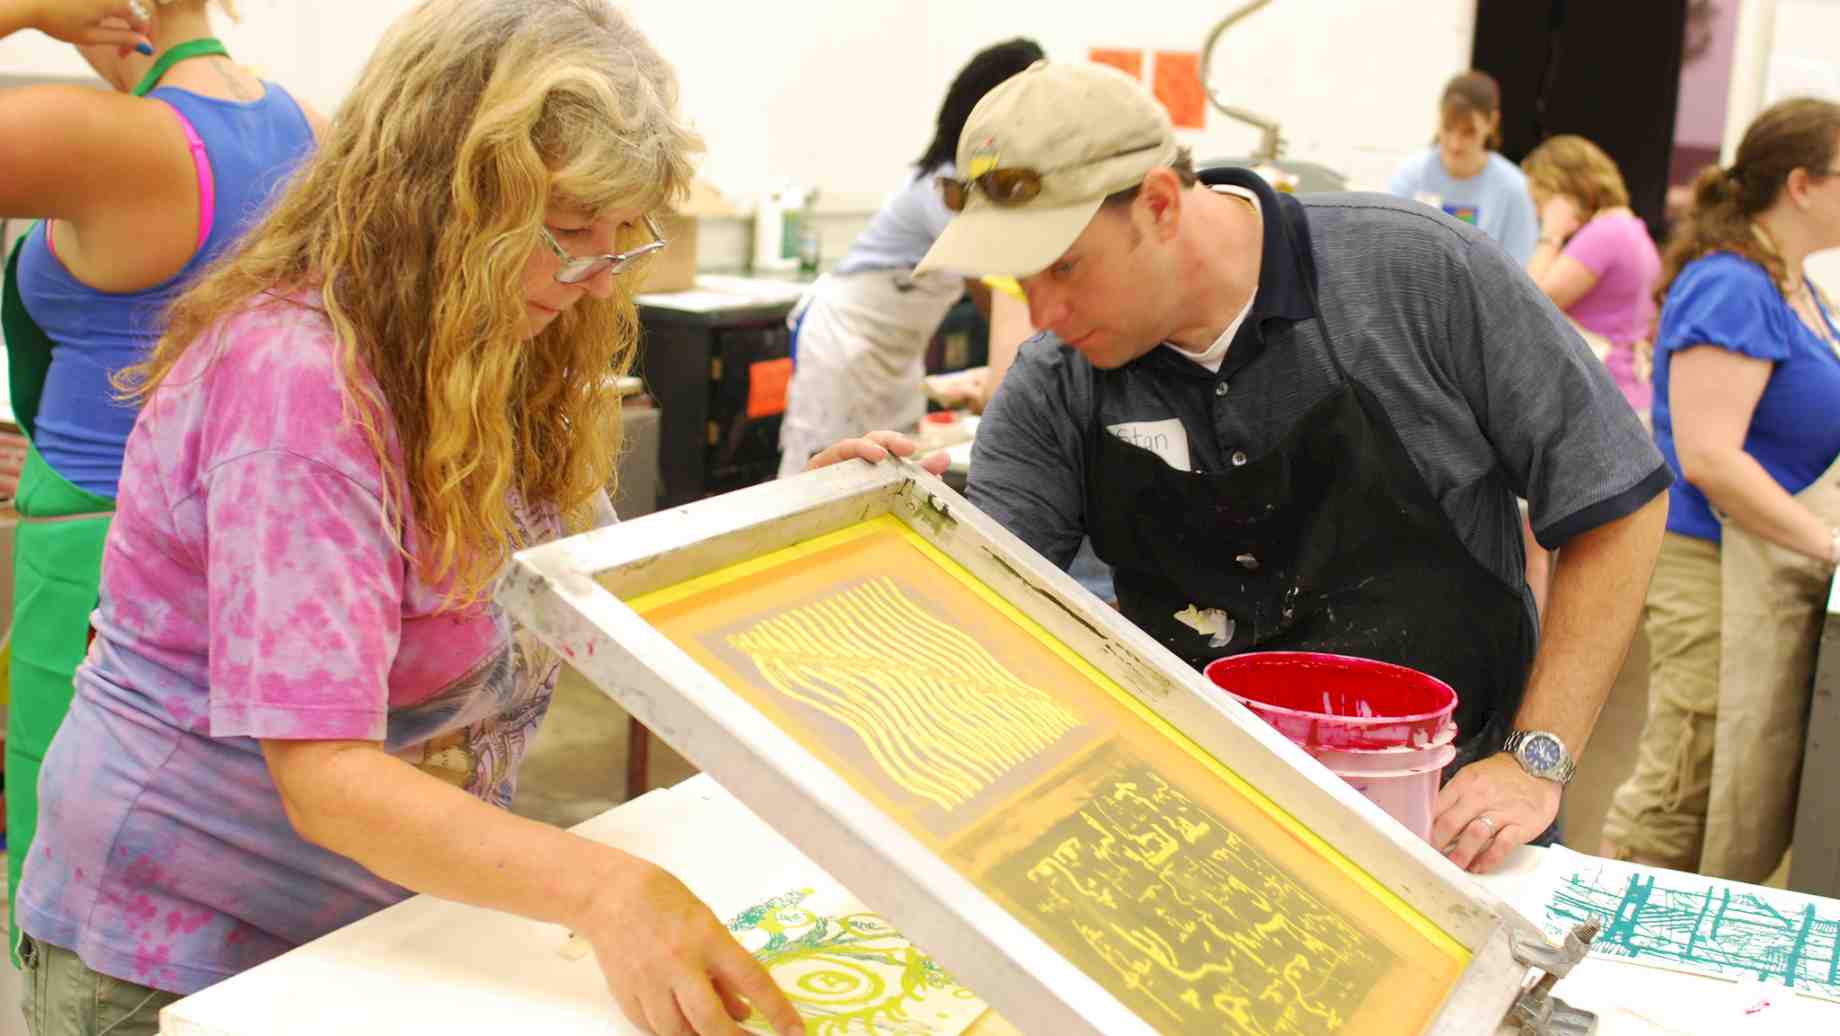 Screenprinting requires collaboration in the print studio, Summer 2014.